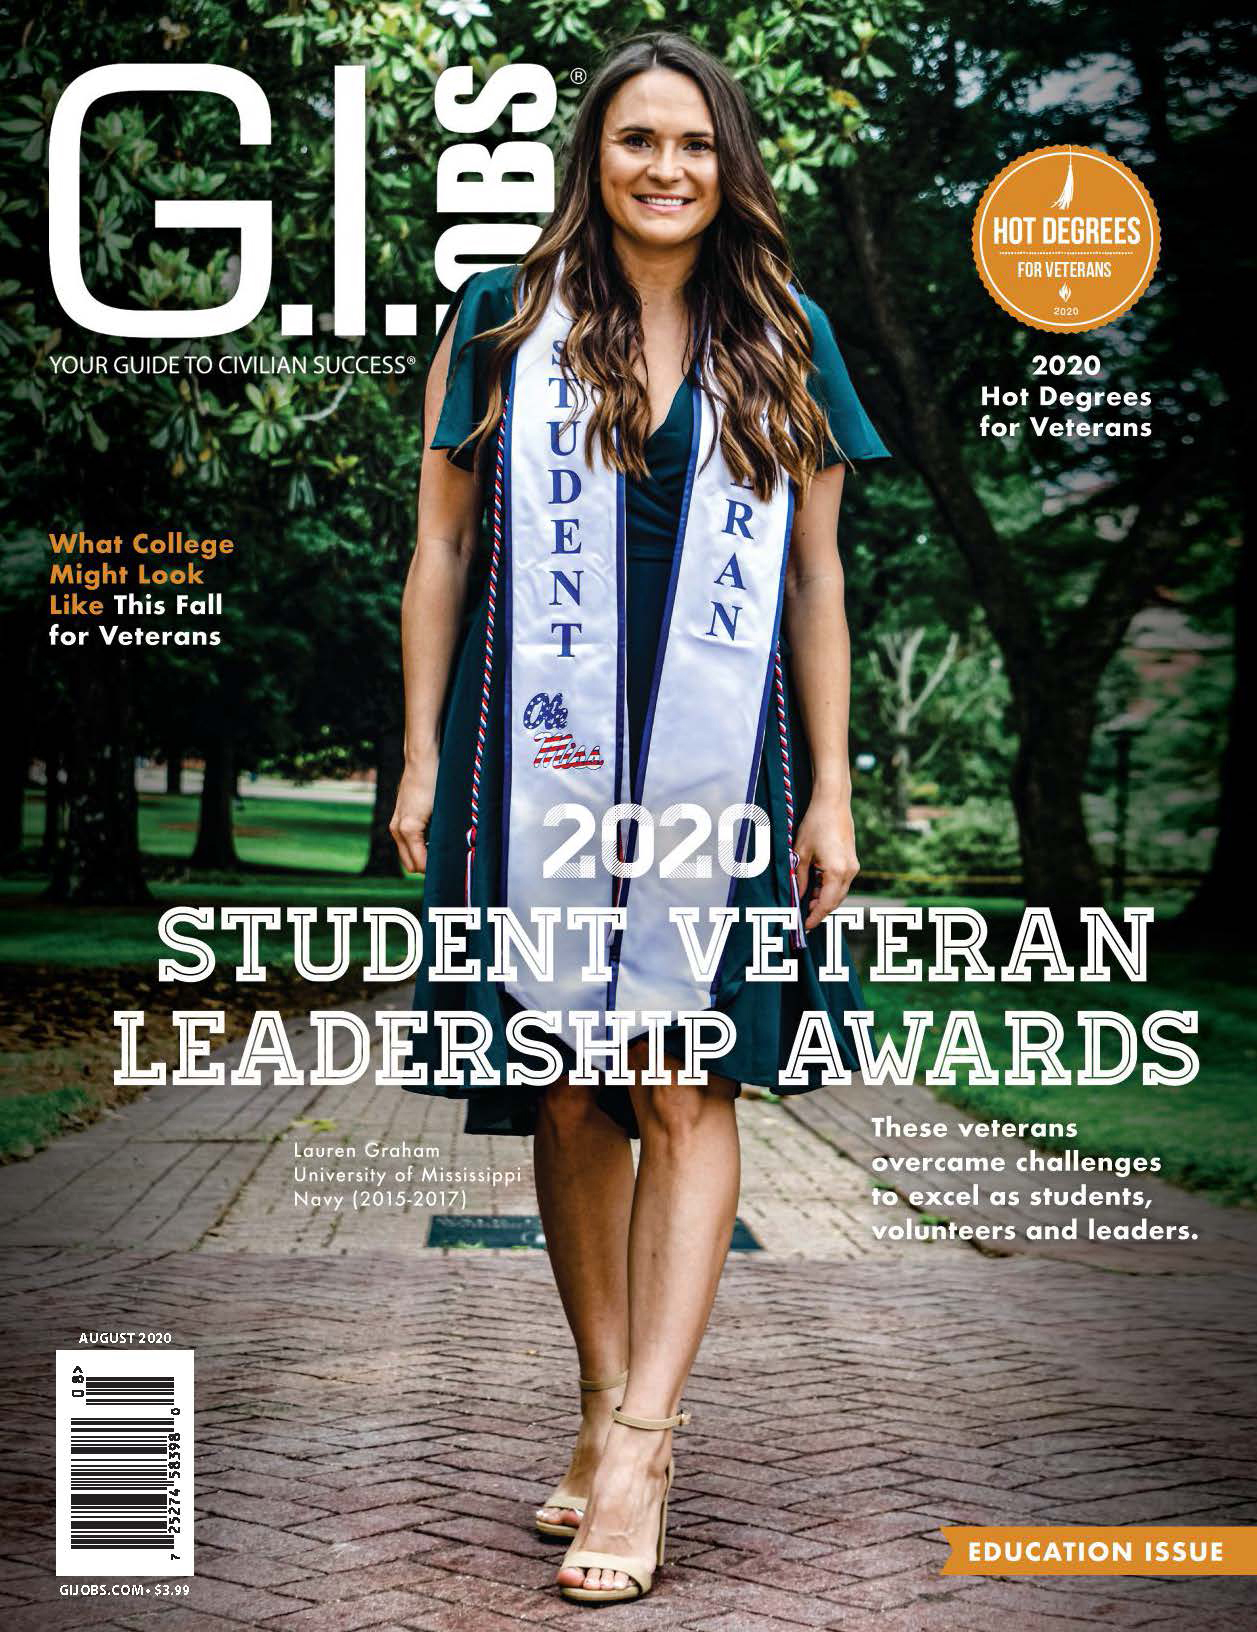 this image shows the cover of GI Jobs Magazine featuring Lauren Graham as its subject